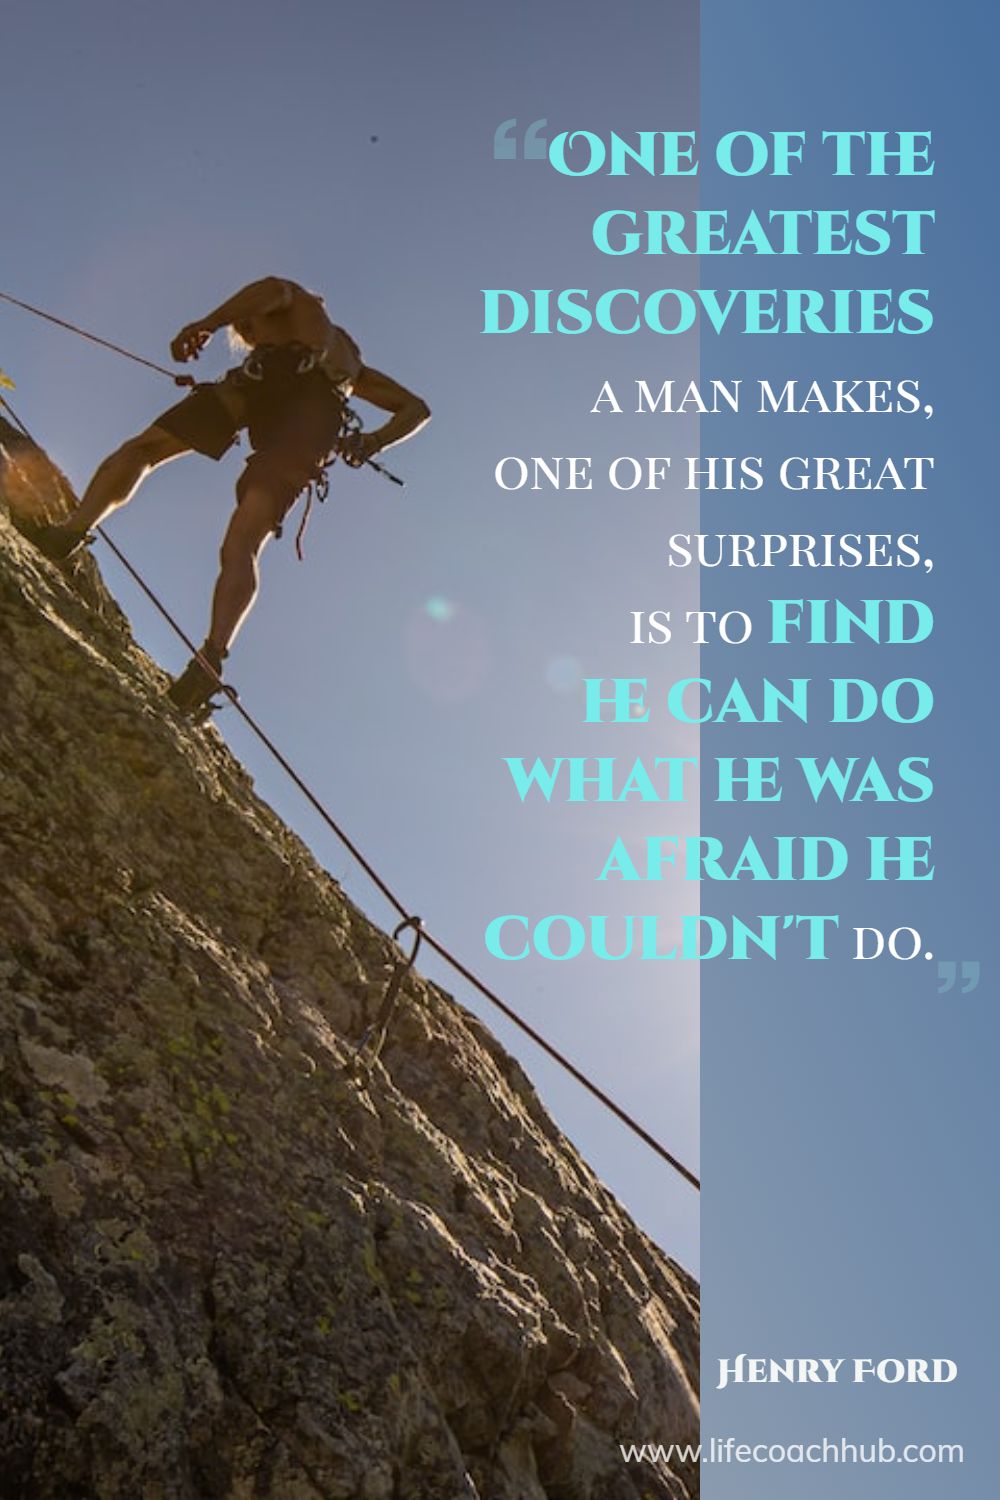 One of the greatest discoveries a man makes, one of his great surprises, is to find he can do what he was afraid he couldn't do. Henry Ford Coaching Quote